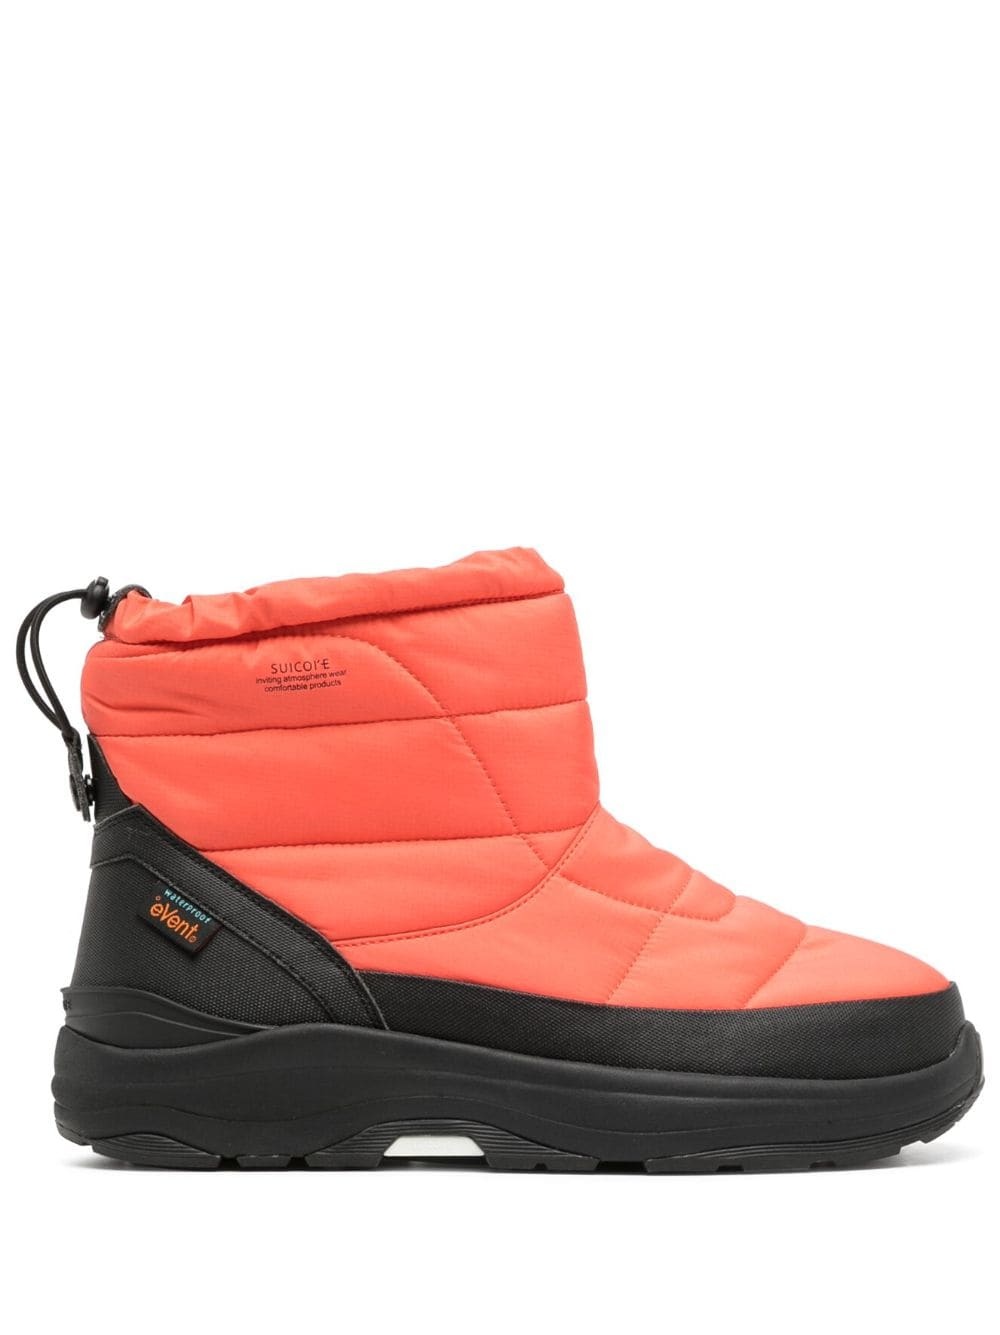 Bower padded snow boots - 1